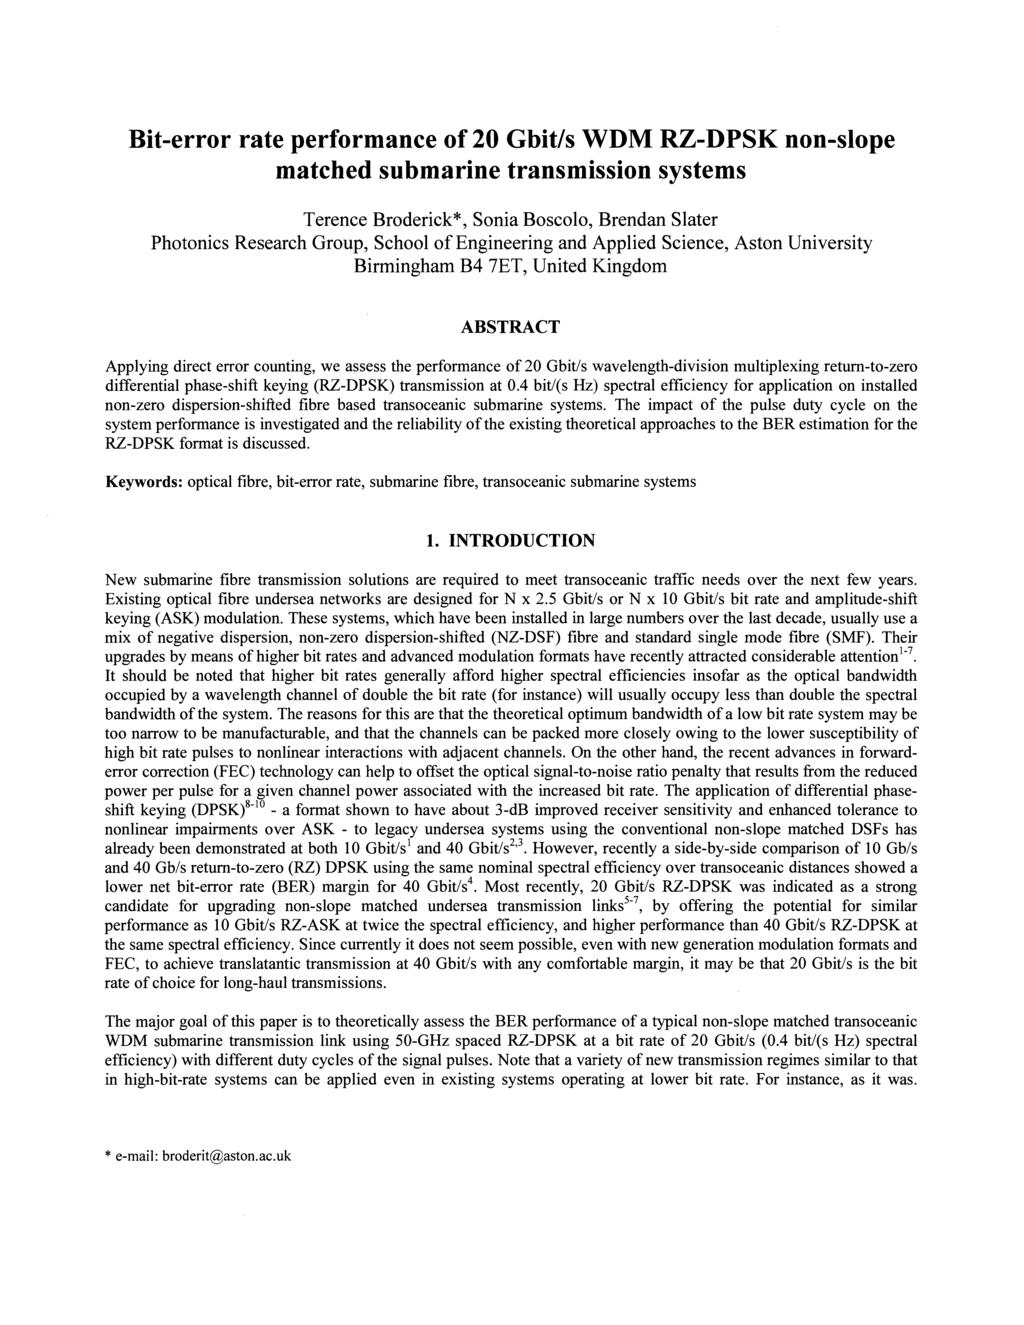 Bit-error rate performance of 20 Gbit/s WDM RZ-DPSK non-slope matched submarine transmission systems Terence Broderick*, Sonia Boscolo, Brendan Slater Photonics Research Group, School of Engineering